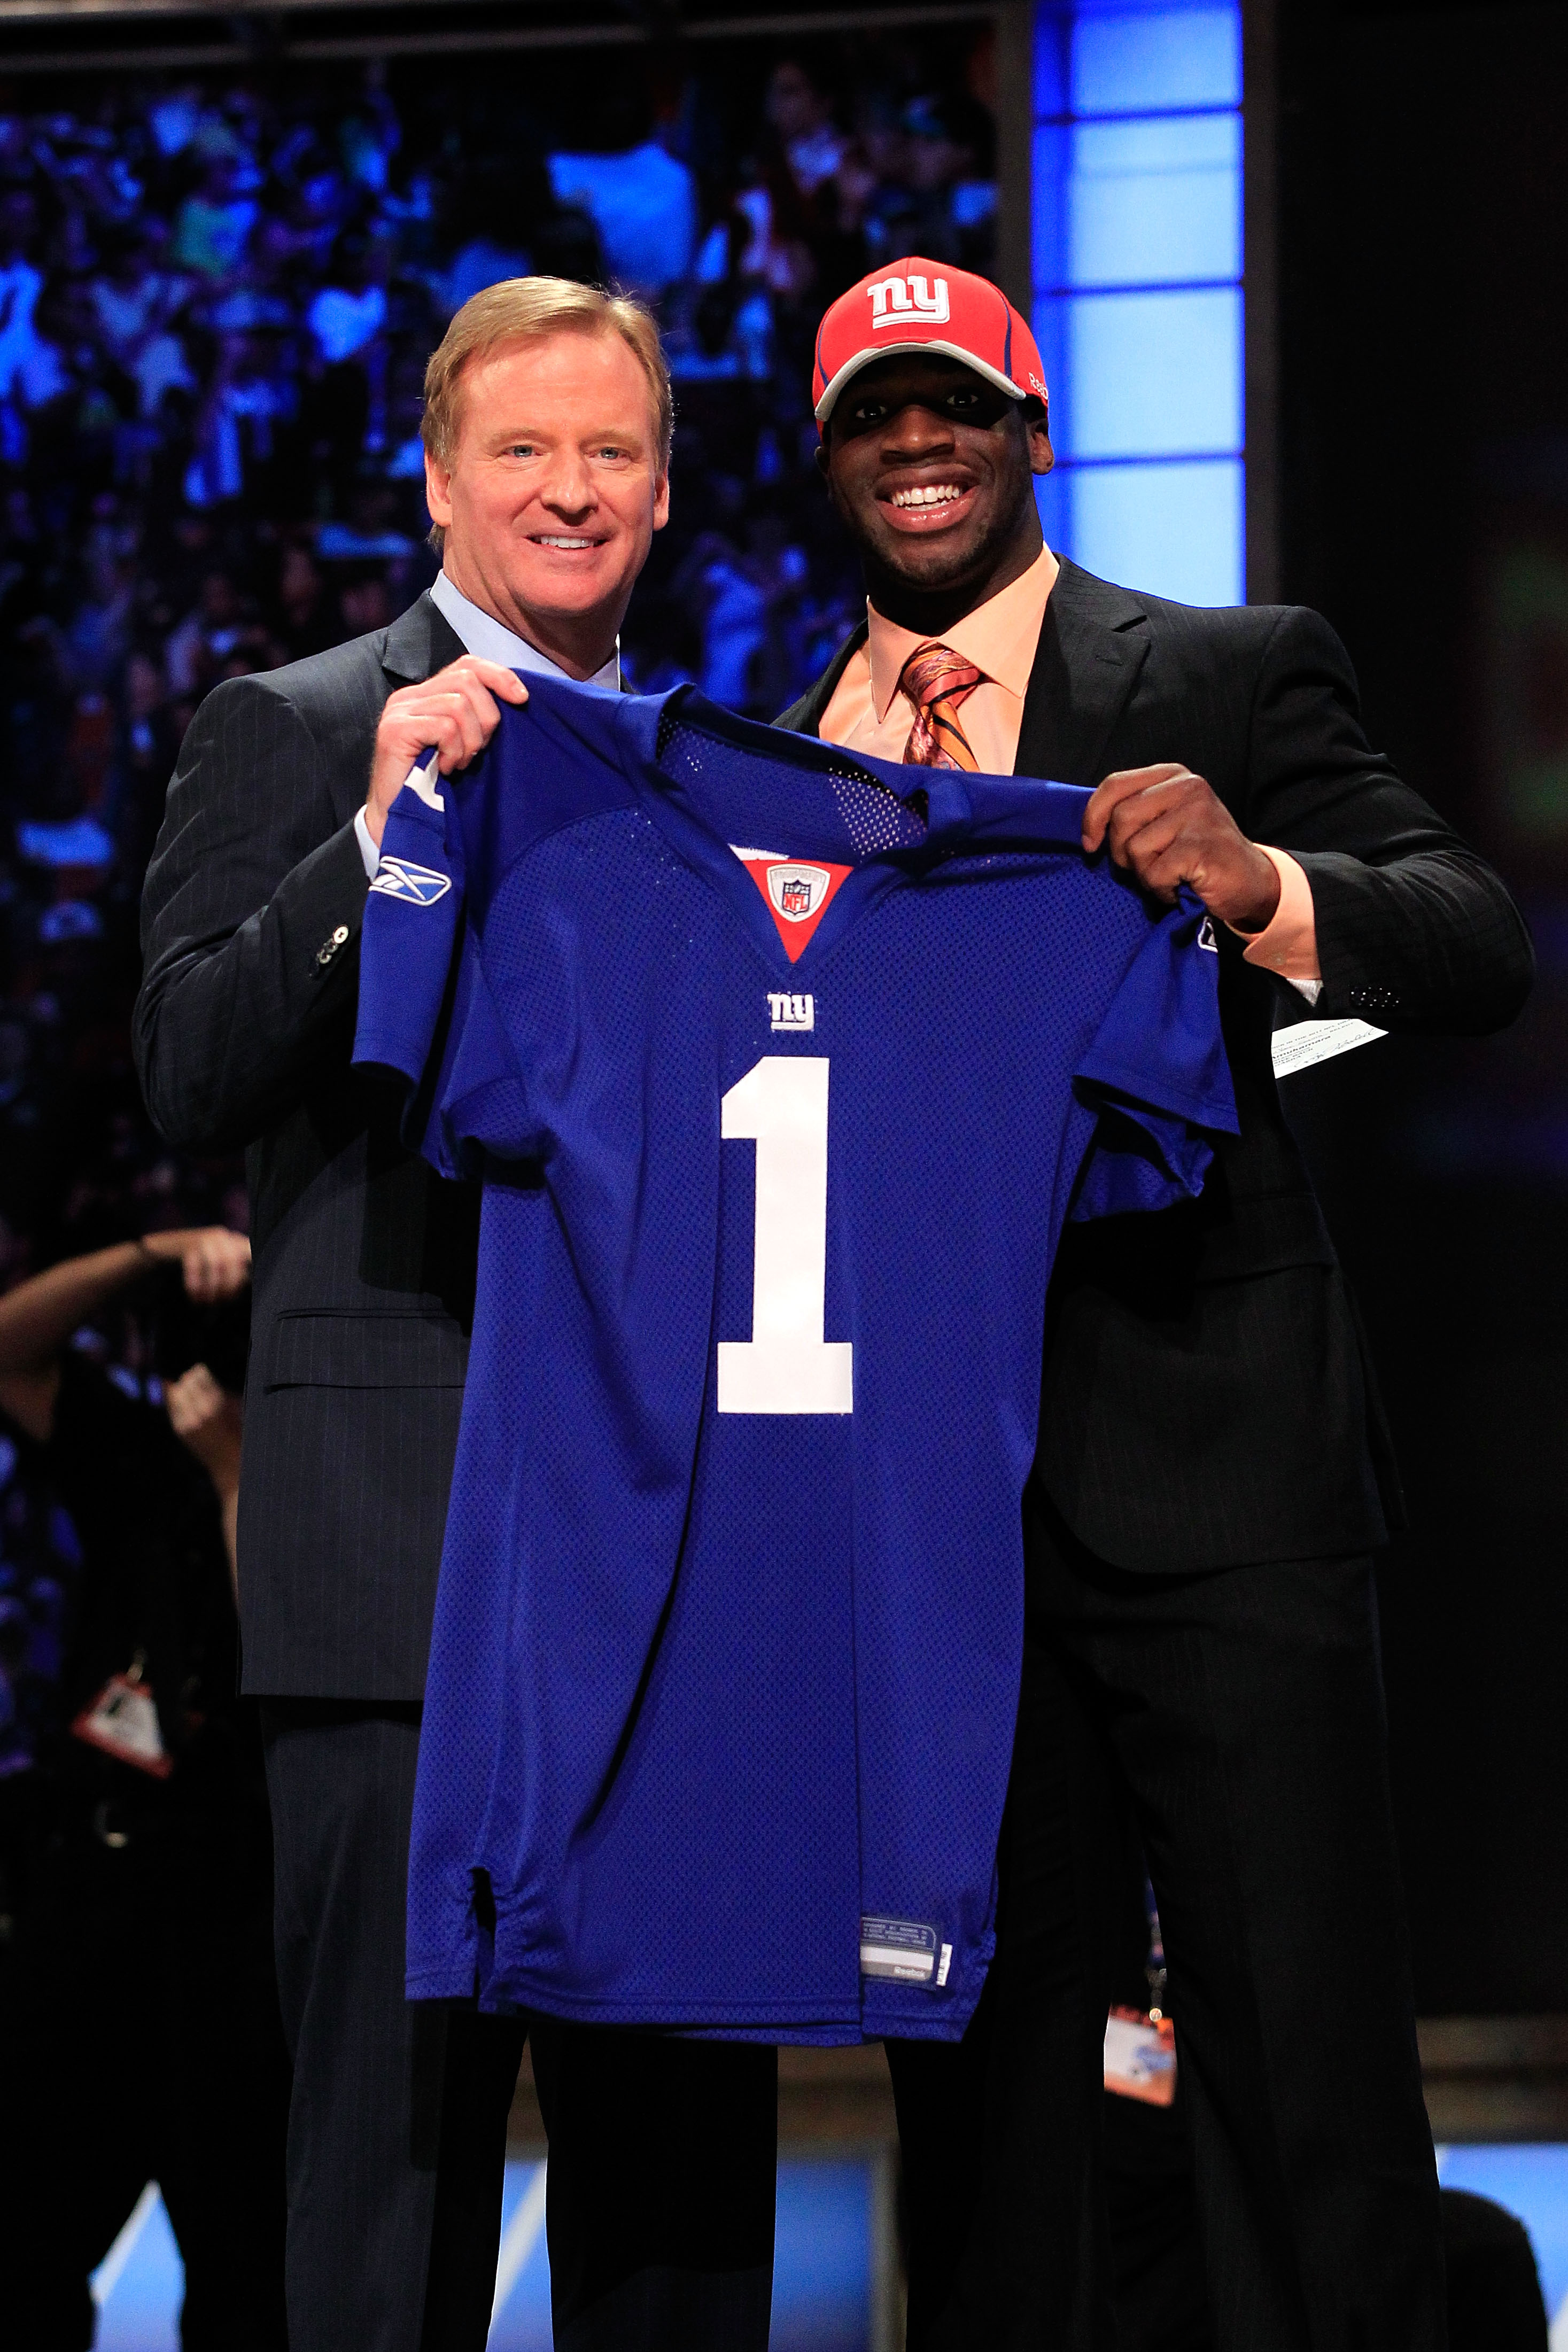 NEW YORK, NY - APRIL 28:  NFL Commissioner Roger Goodell (L) poses for a photo with Prince Amukamara, #19 overall pick by the New York Giants, on stage during the 2011 NFL Draft at Radio City Music Hall on April 28, 2011 in New York City.  (Photo by Chris